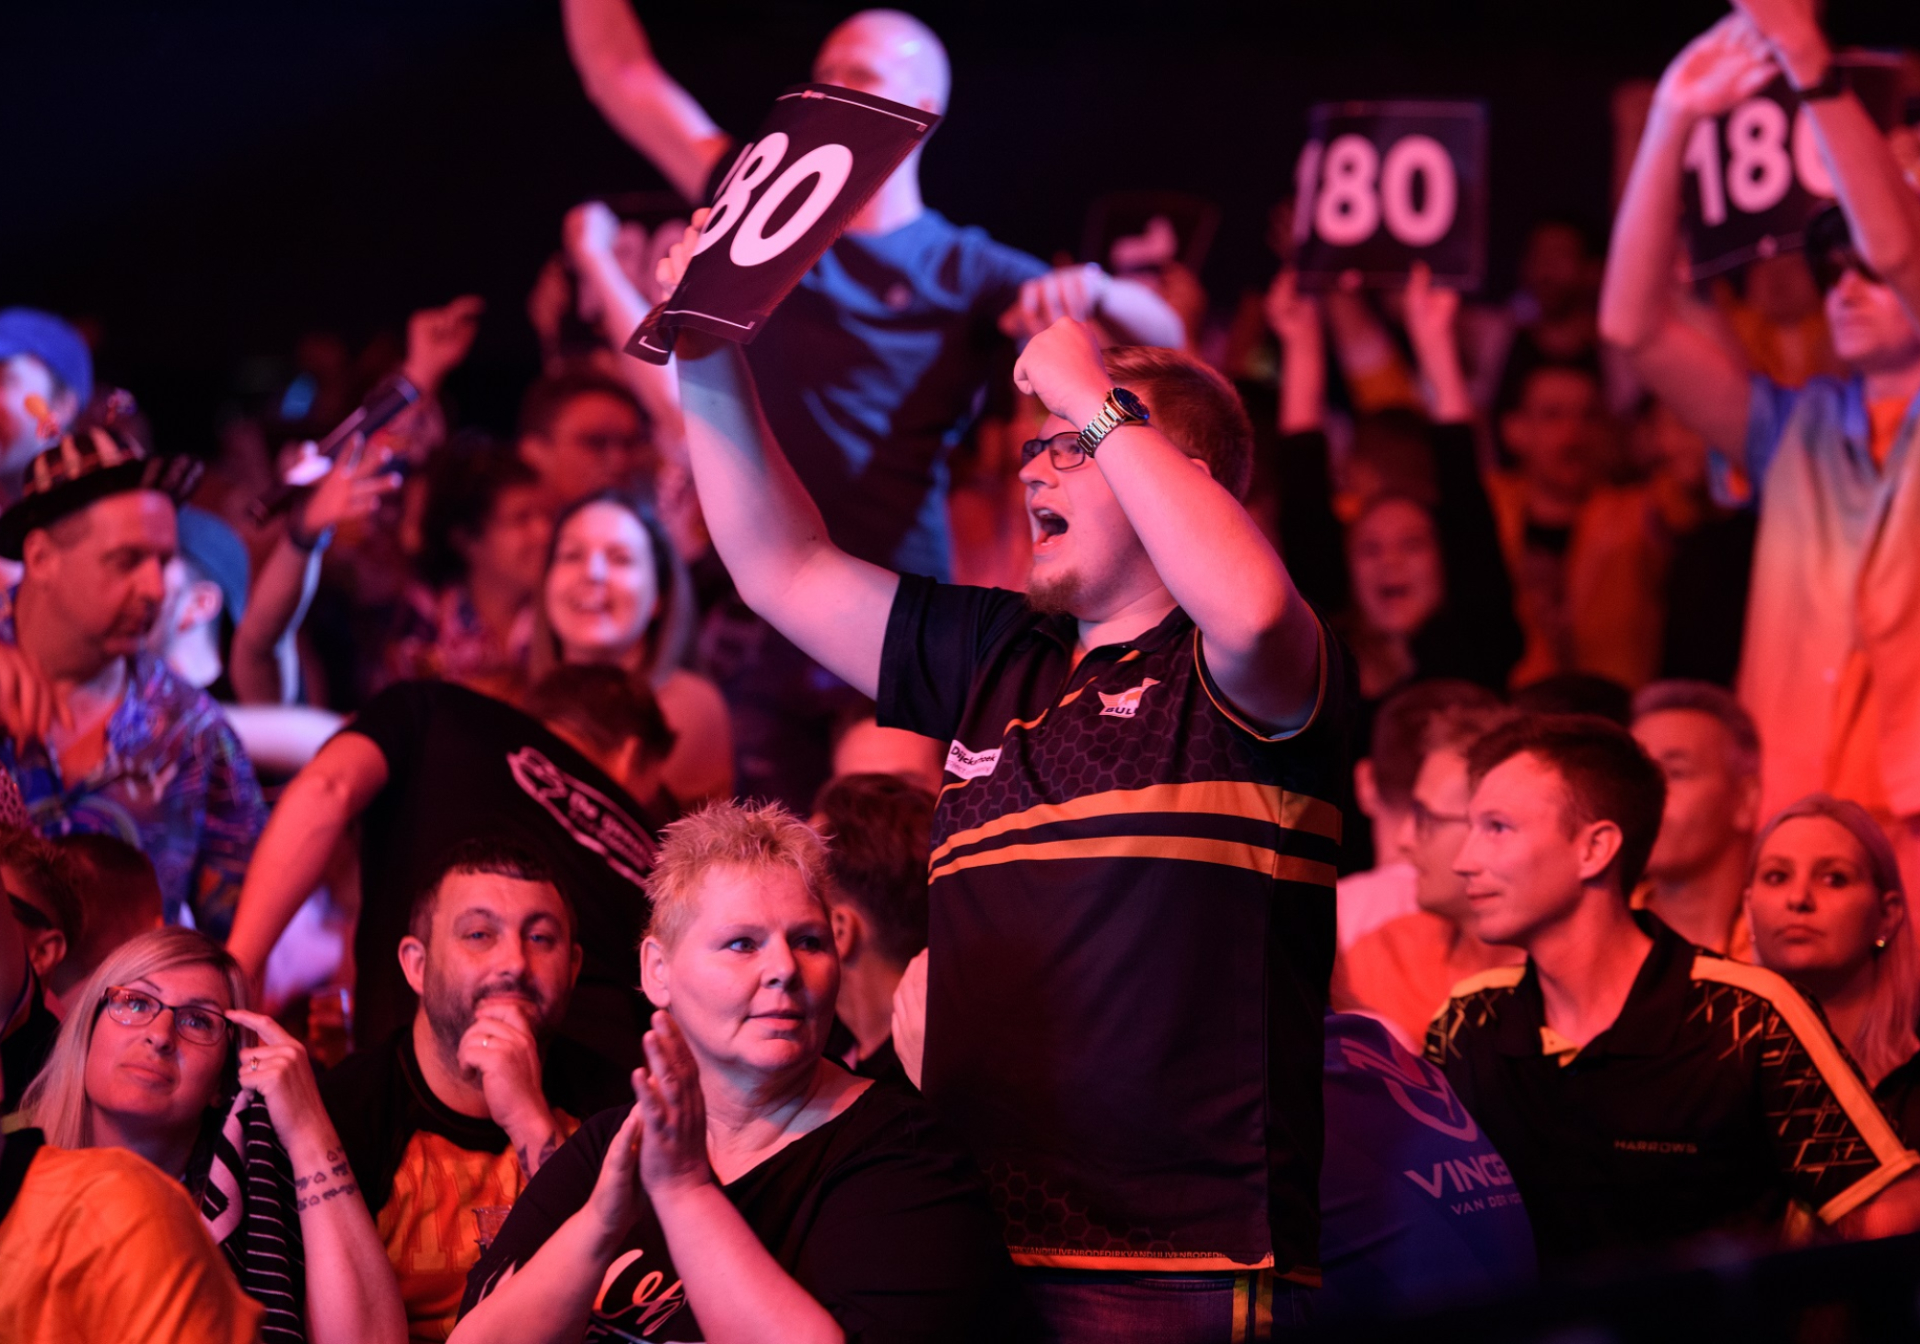 Fans at the Viaplay Dutch Darts Masters